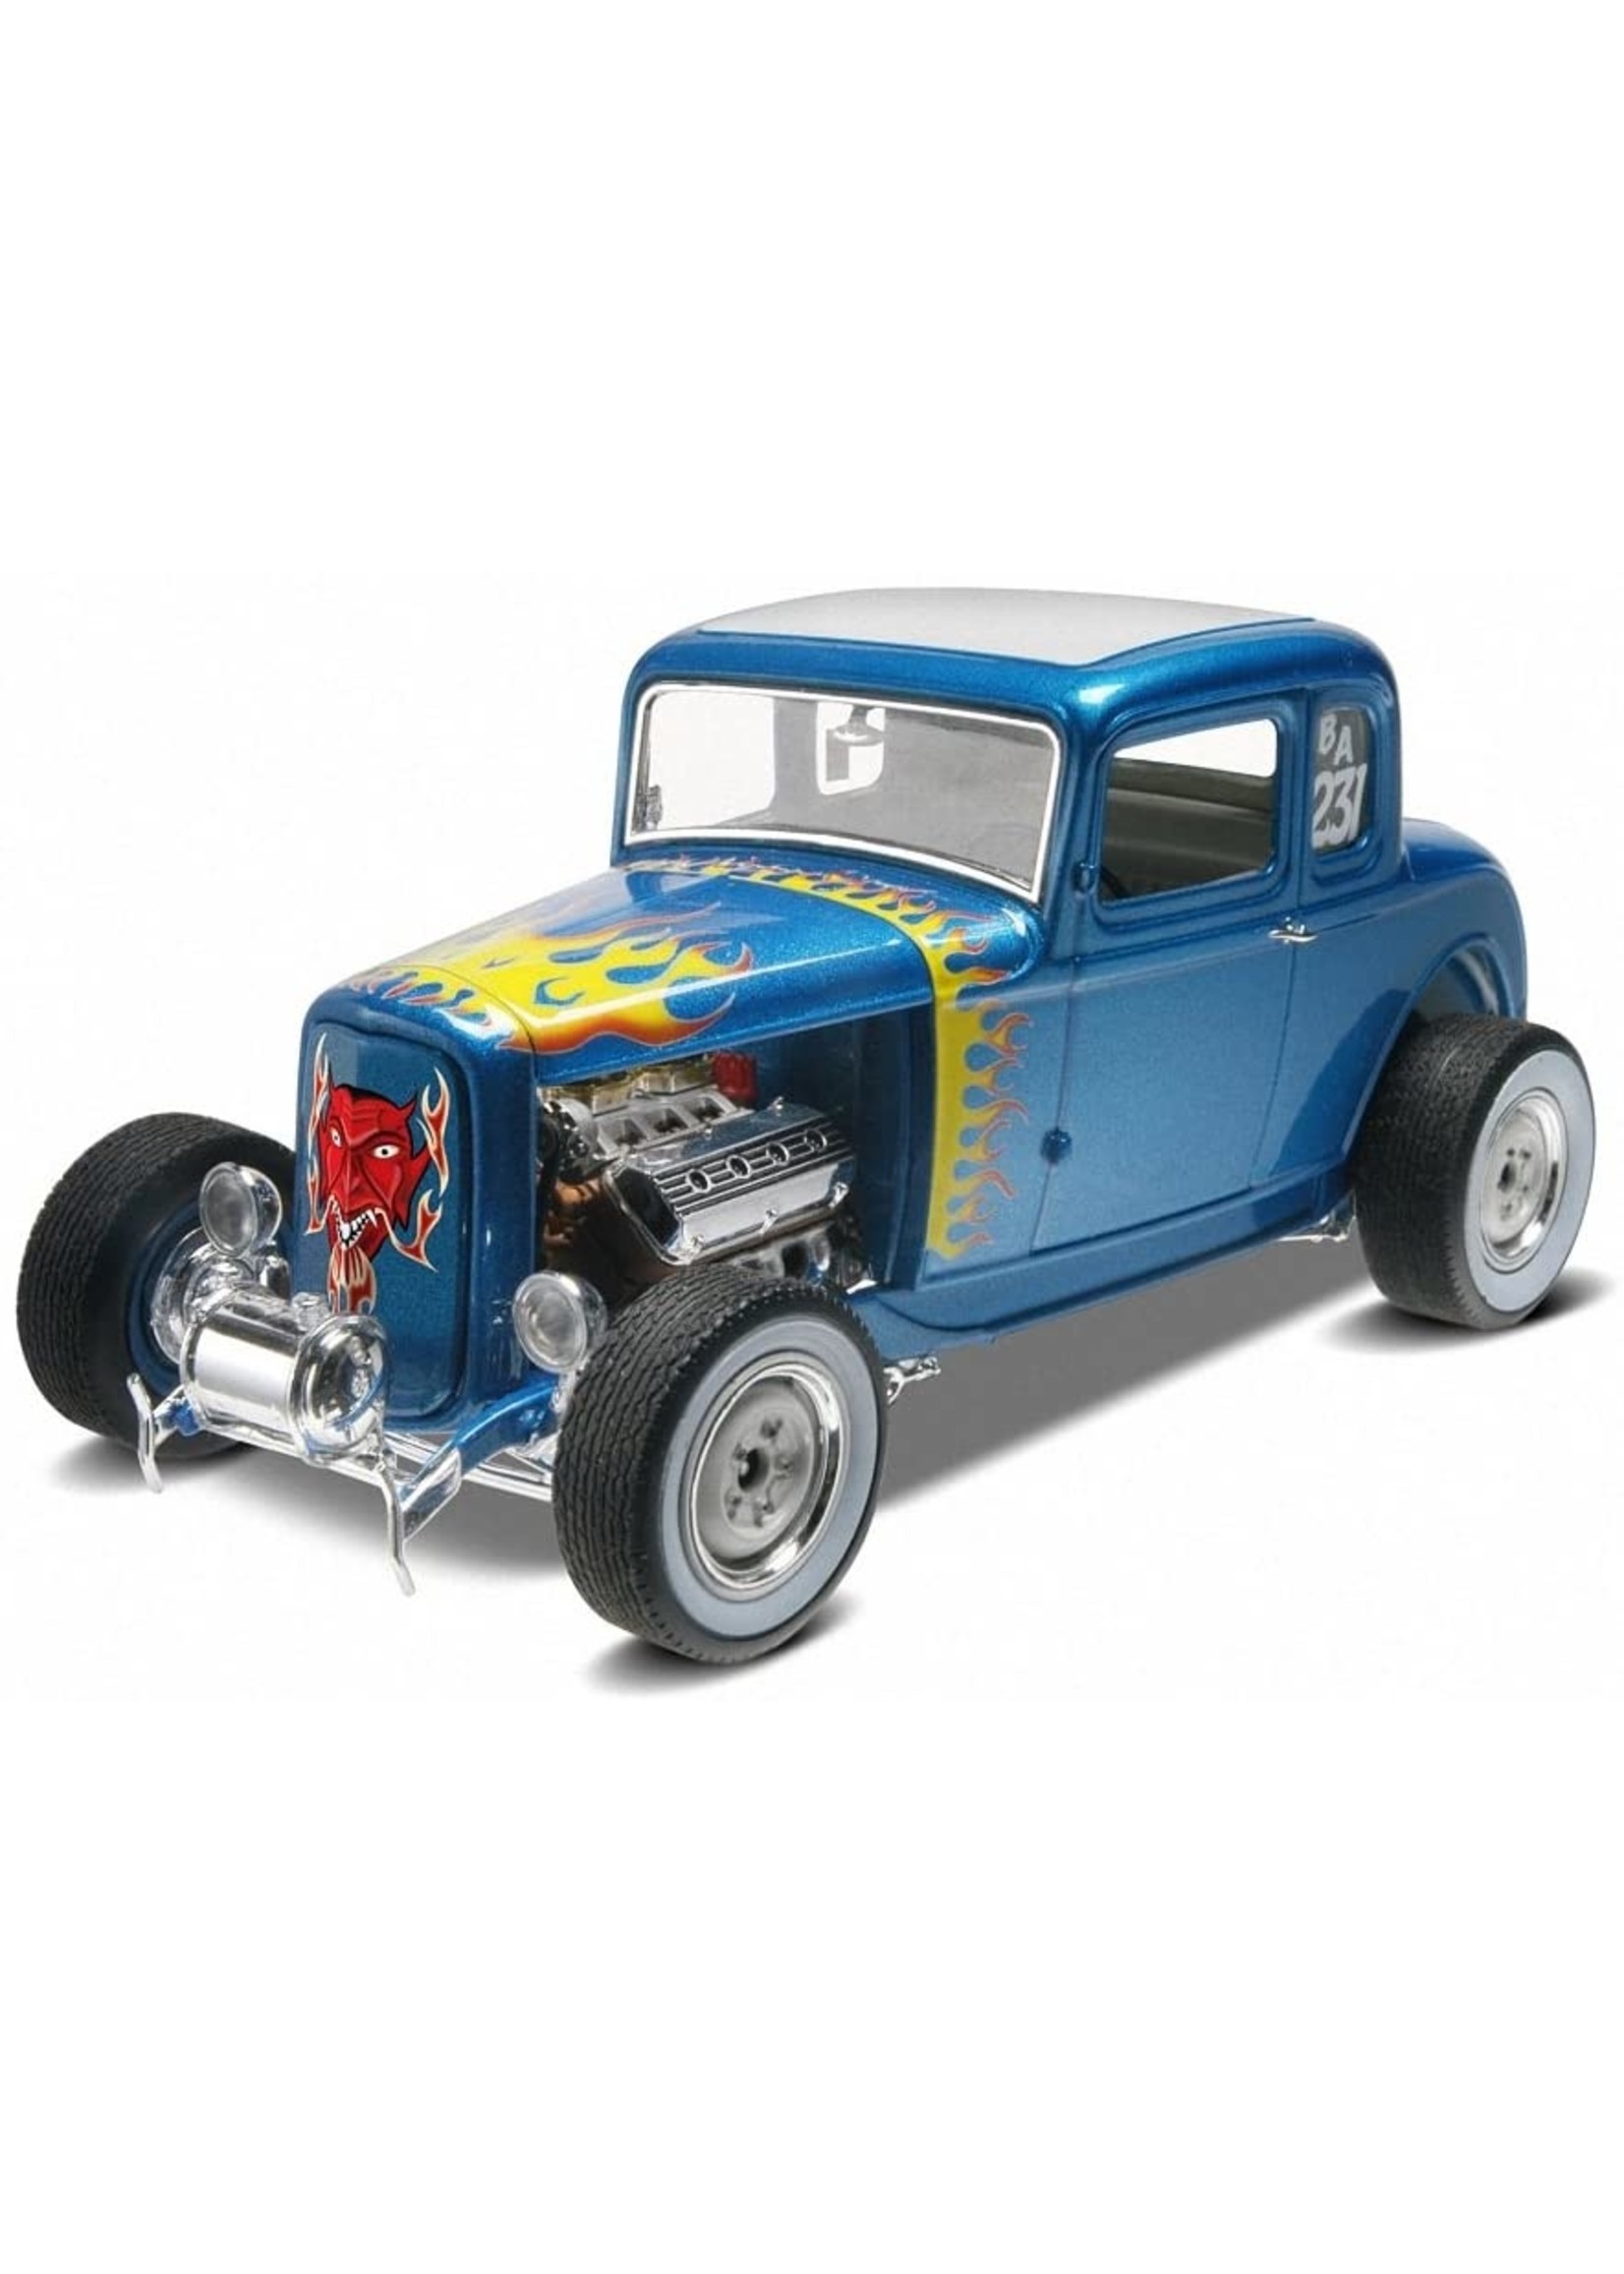 Revell 4228 - 1/25 '32 Ford 5 Window Coupe